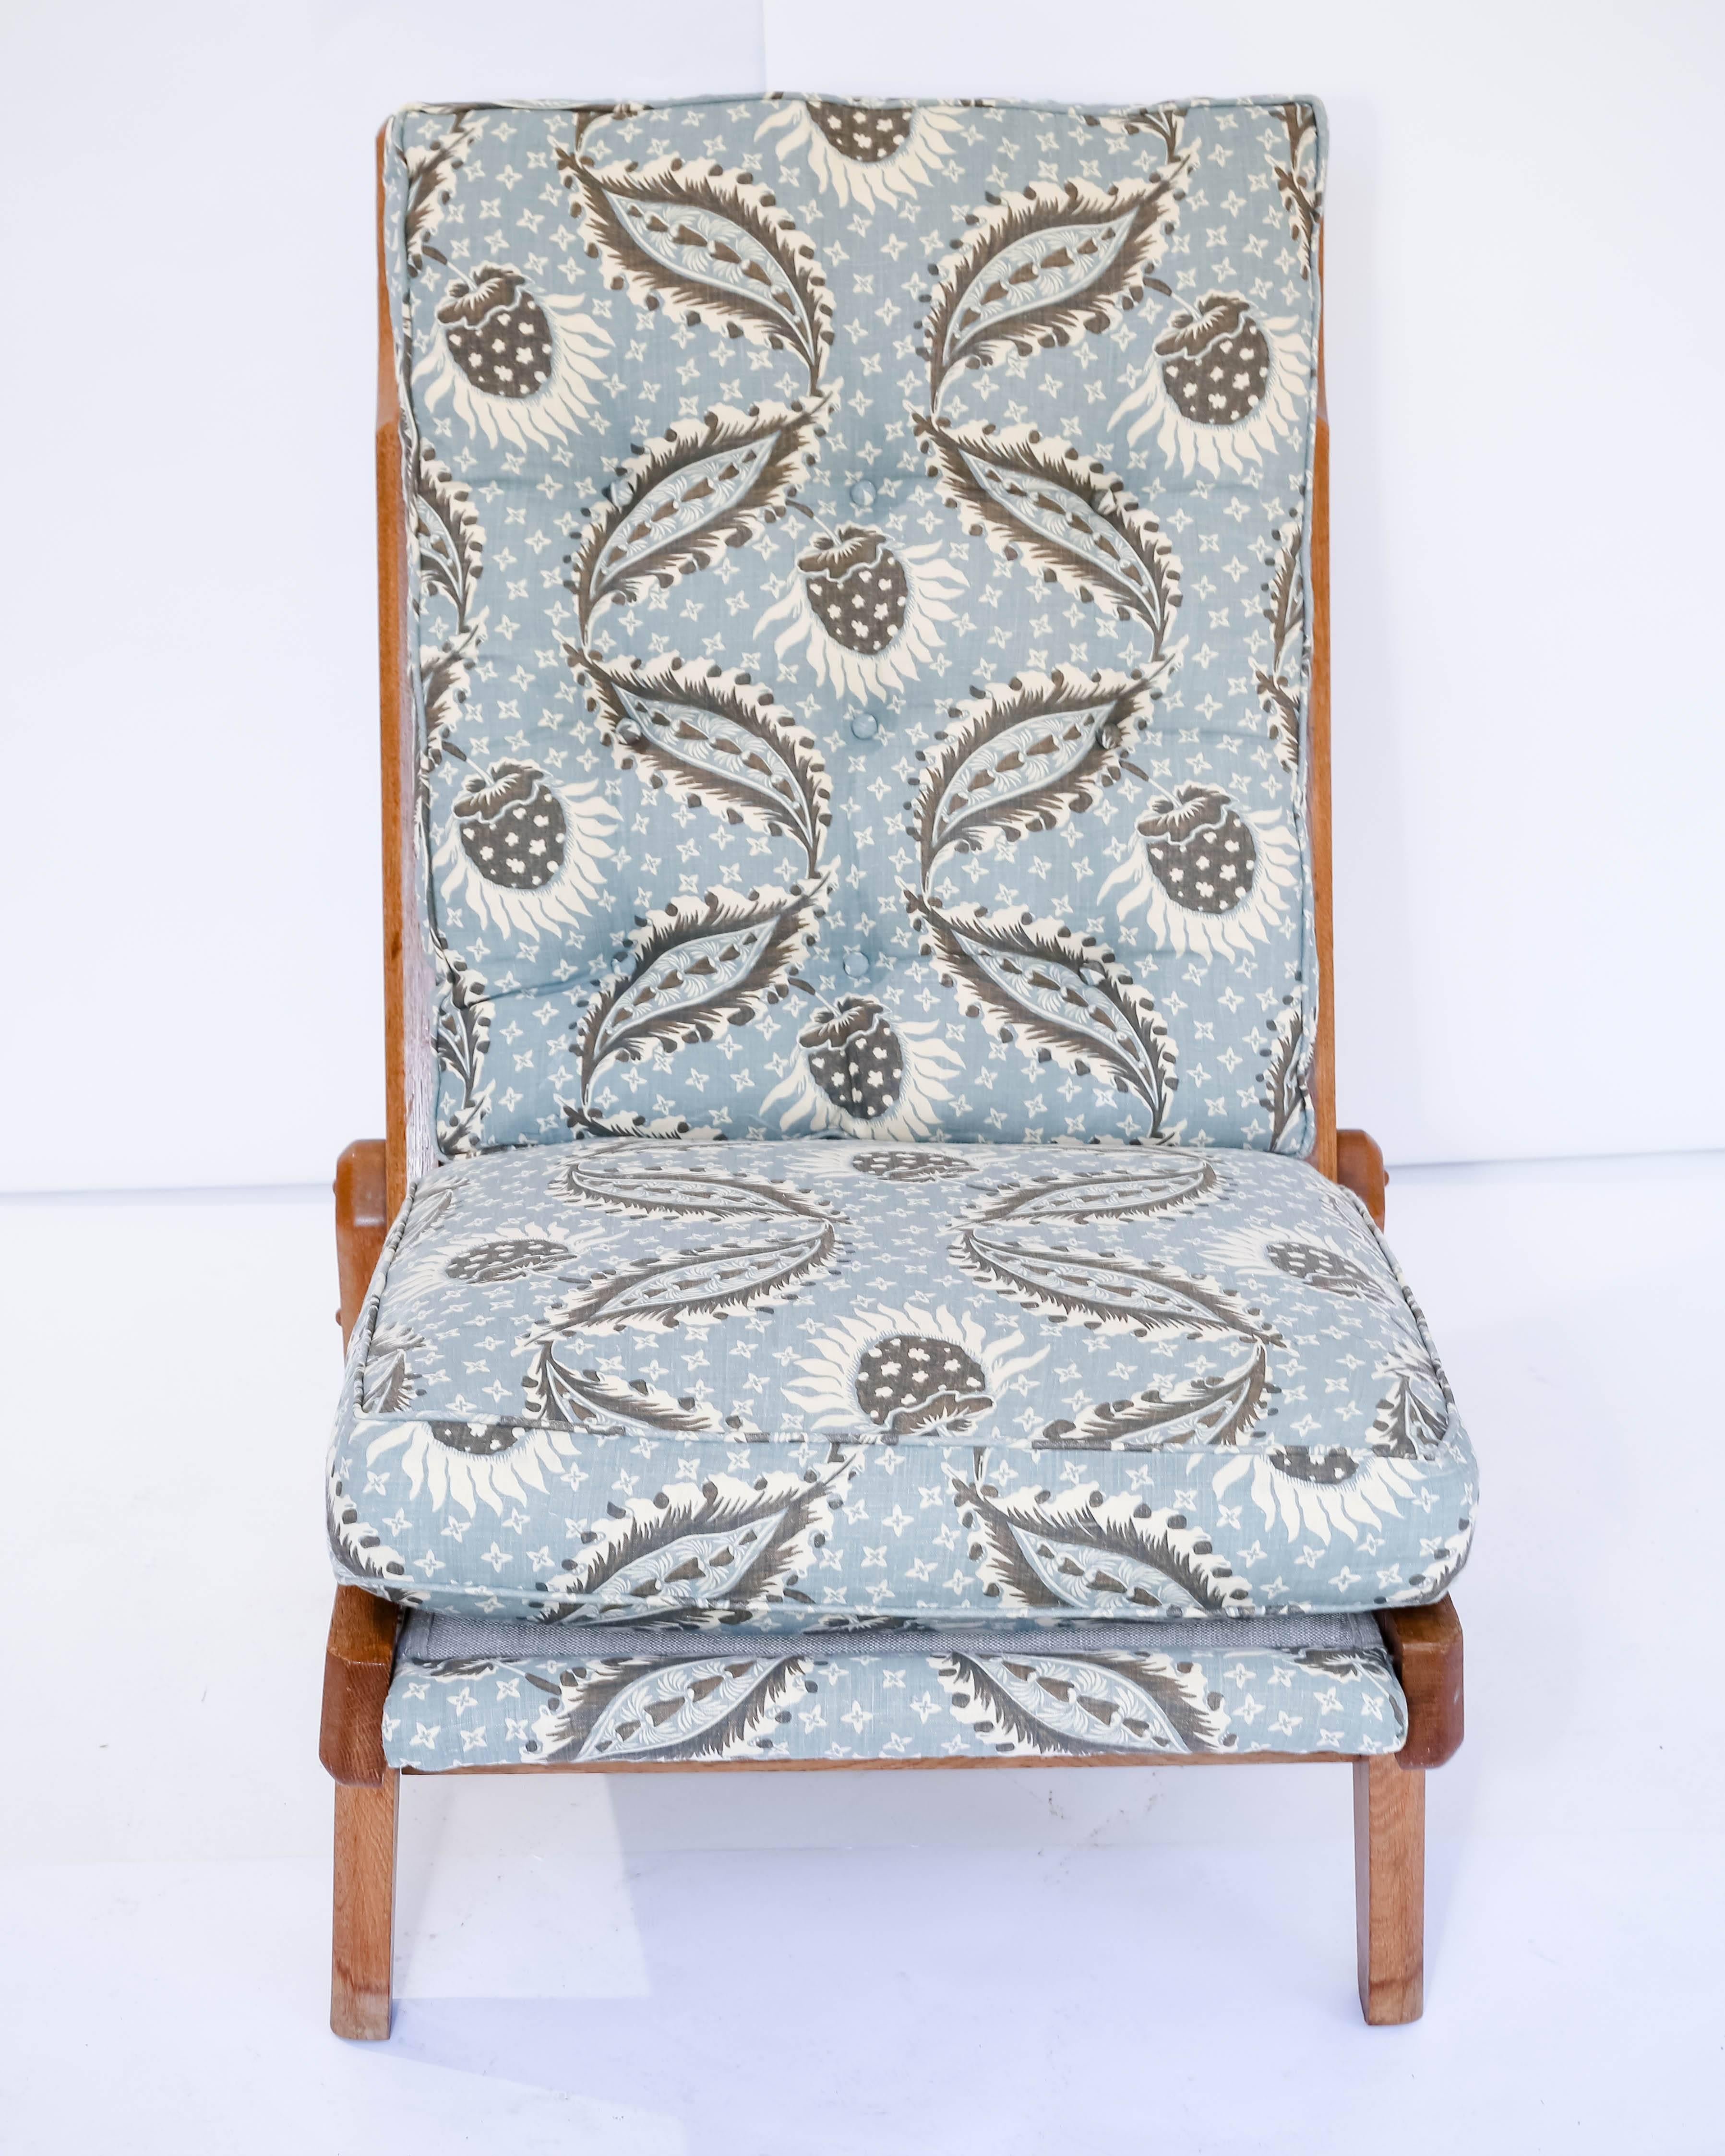 Maurice Pre Lounge Armless Chair in patterned blue fabric, France 20th Century